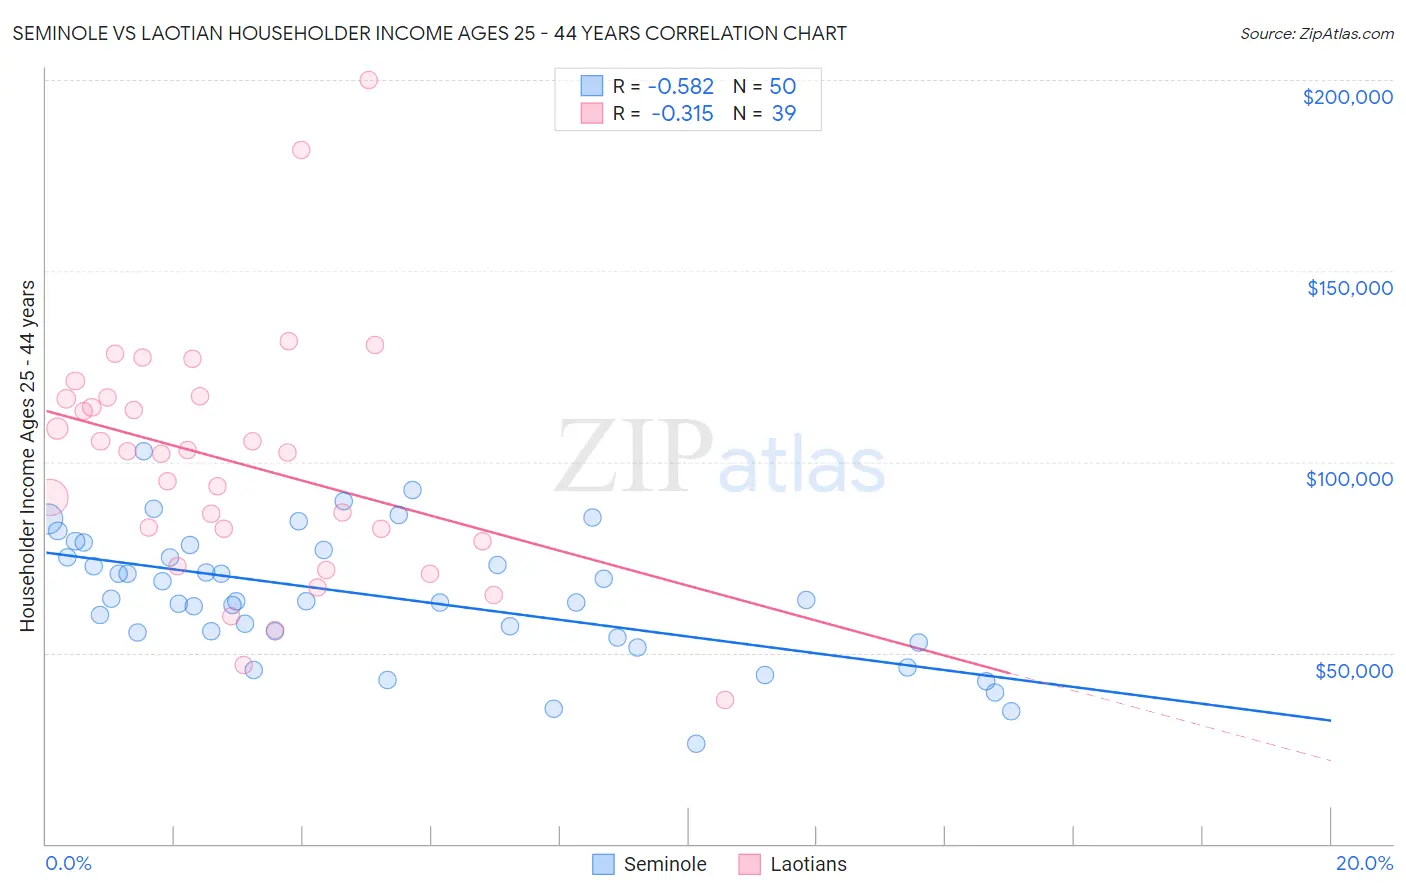 Seminole vs Laotian Householder Income Ages 25 - 44 years